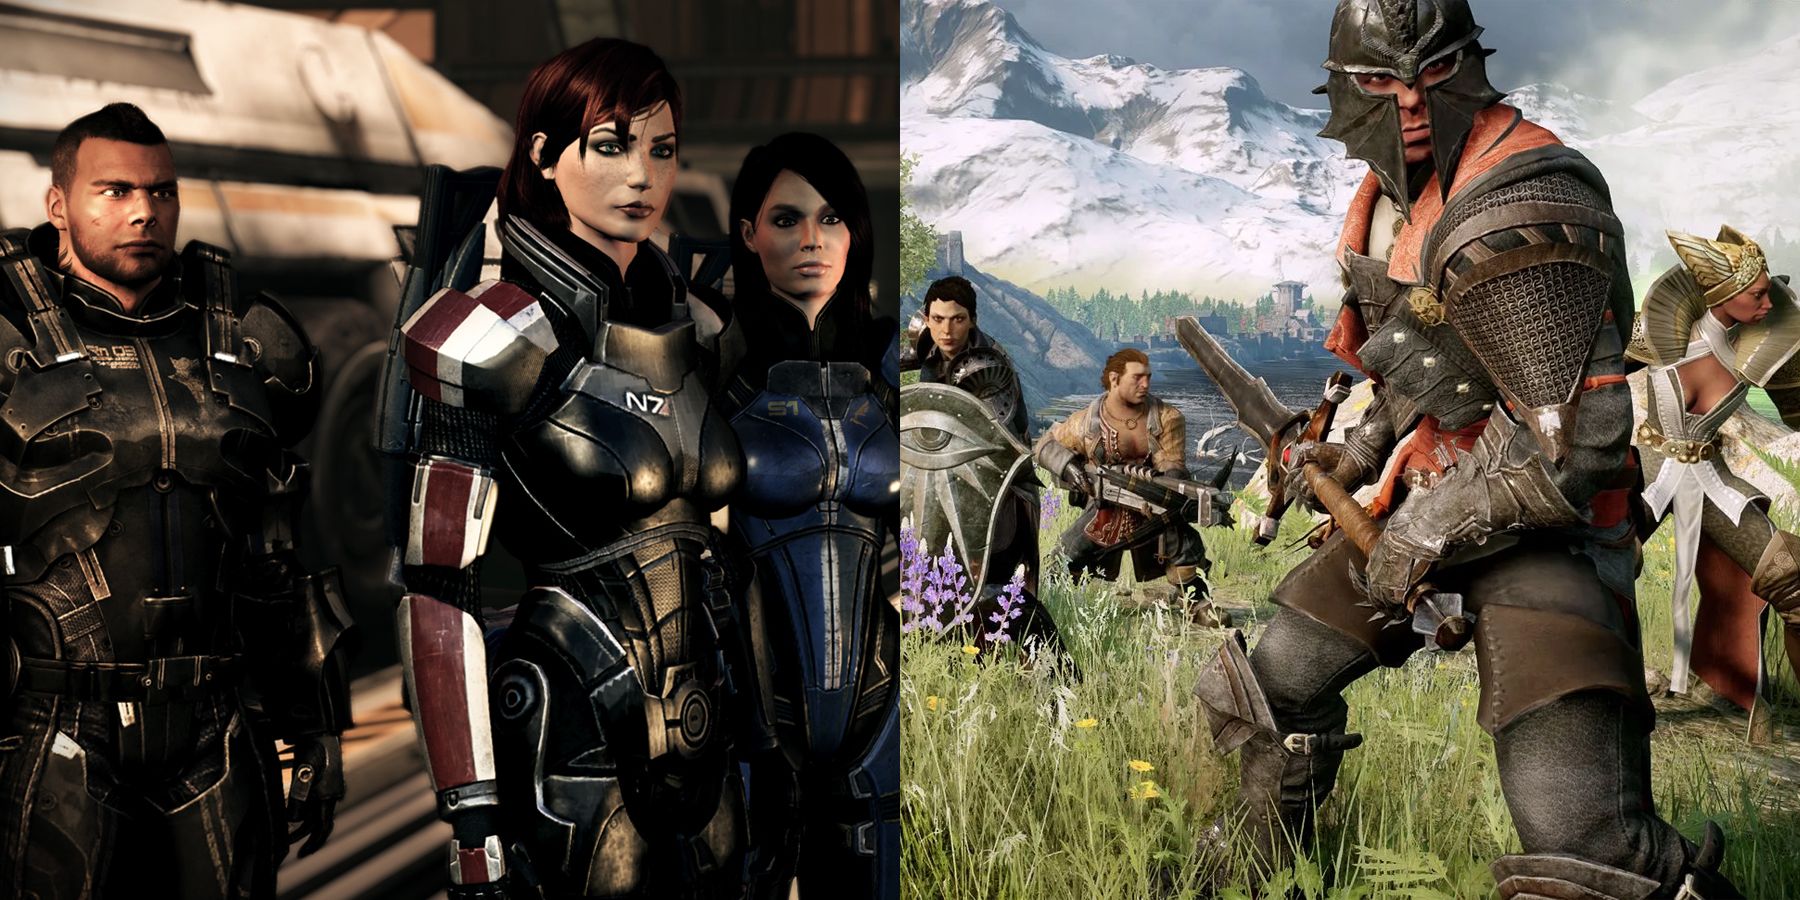 Dragon Age: Inquisition Companions and Their Mass Effect Counterparts